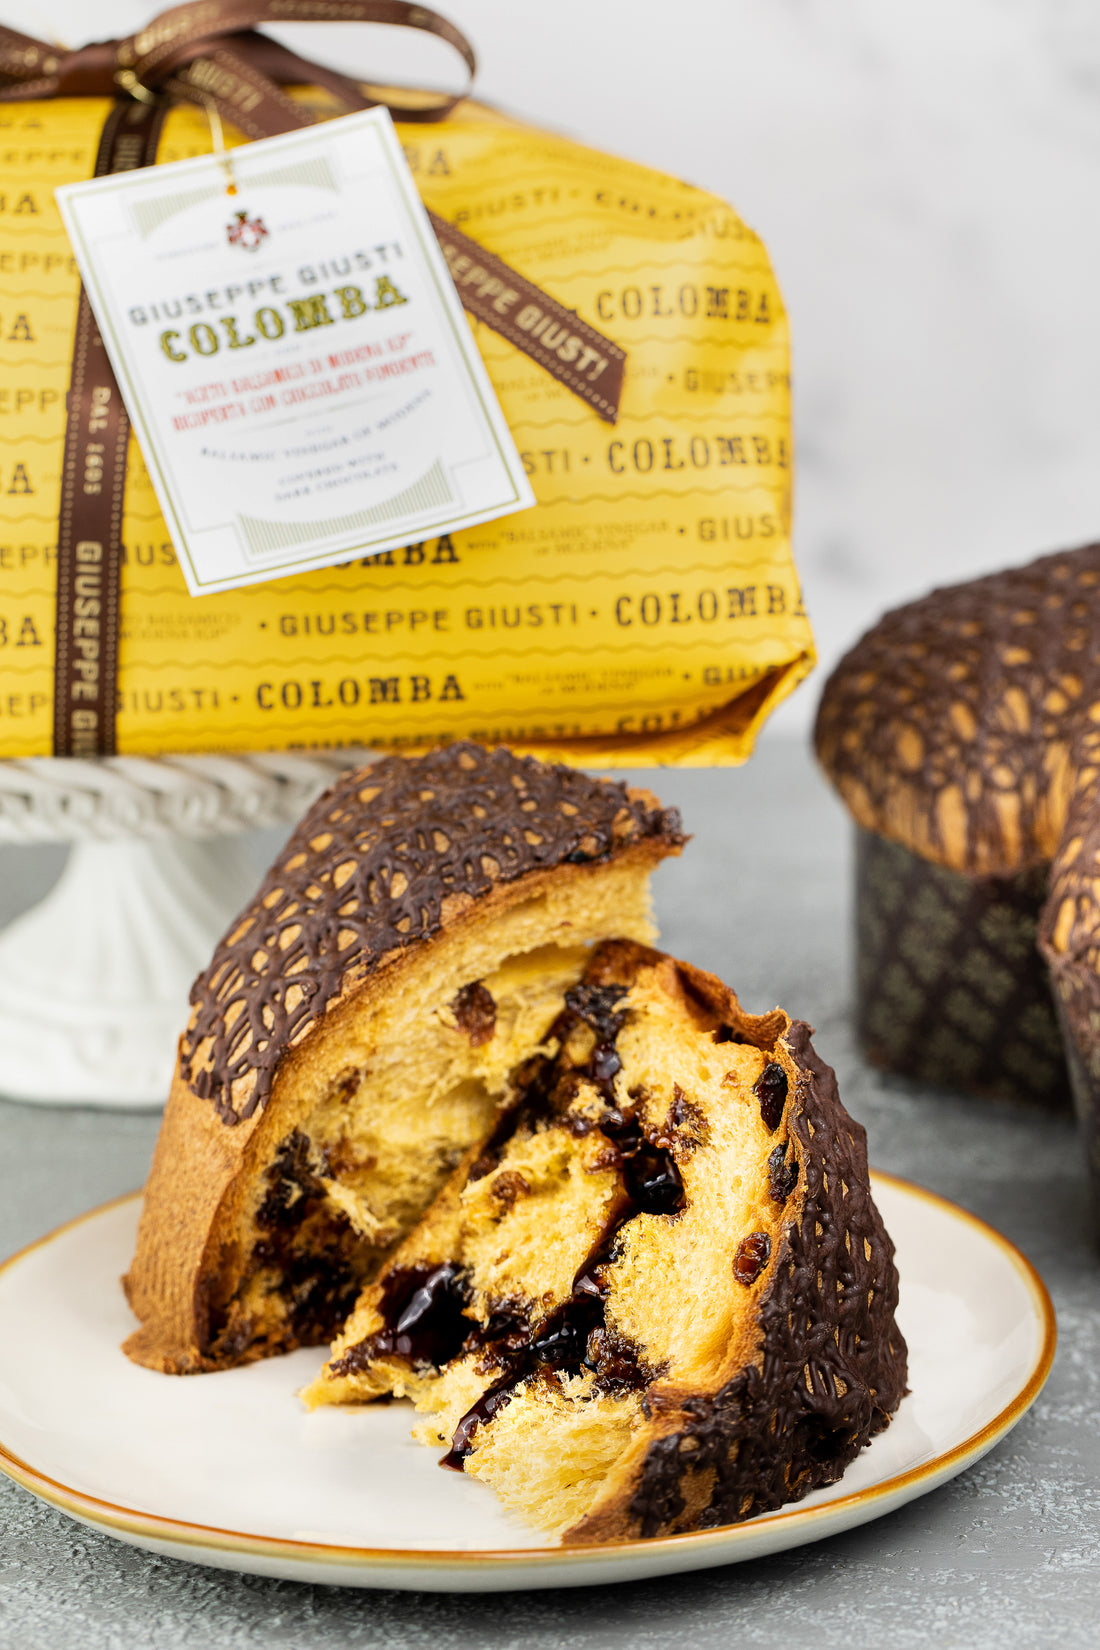 Colomba with Balsamic Vinegar of Modena and dark chocolate coating